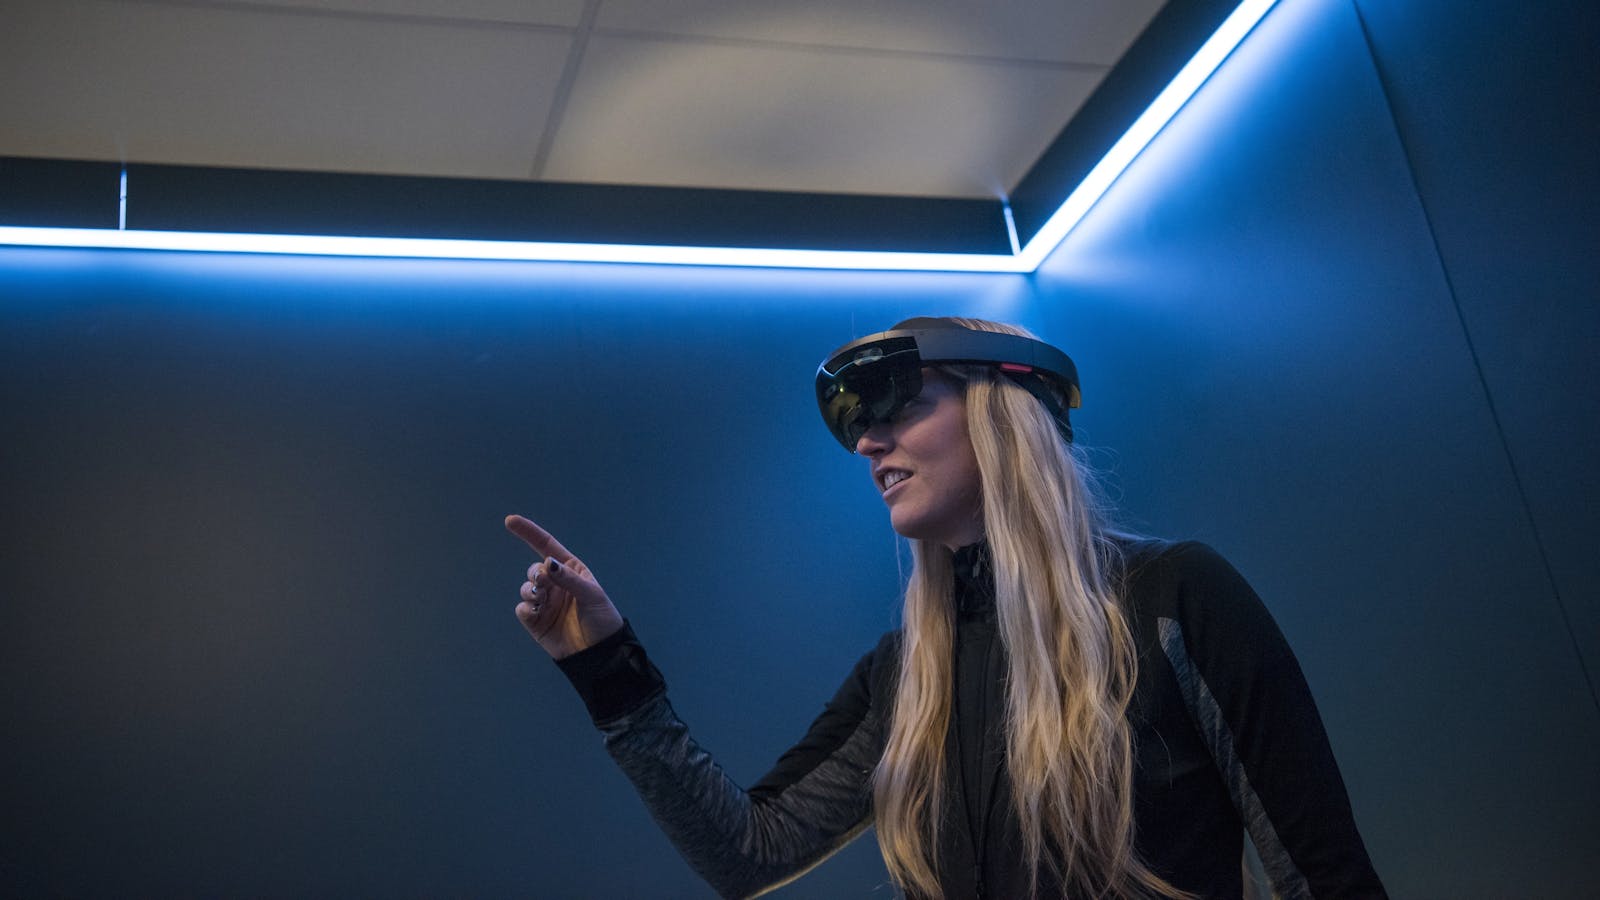 A Microsoft employee demonstrating the HoloLens at a developer conference in March. Photo by Bloomberg.